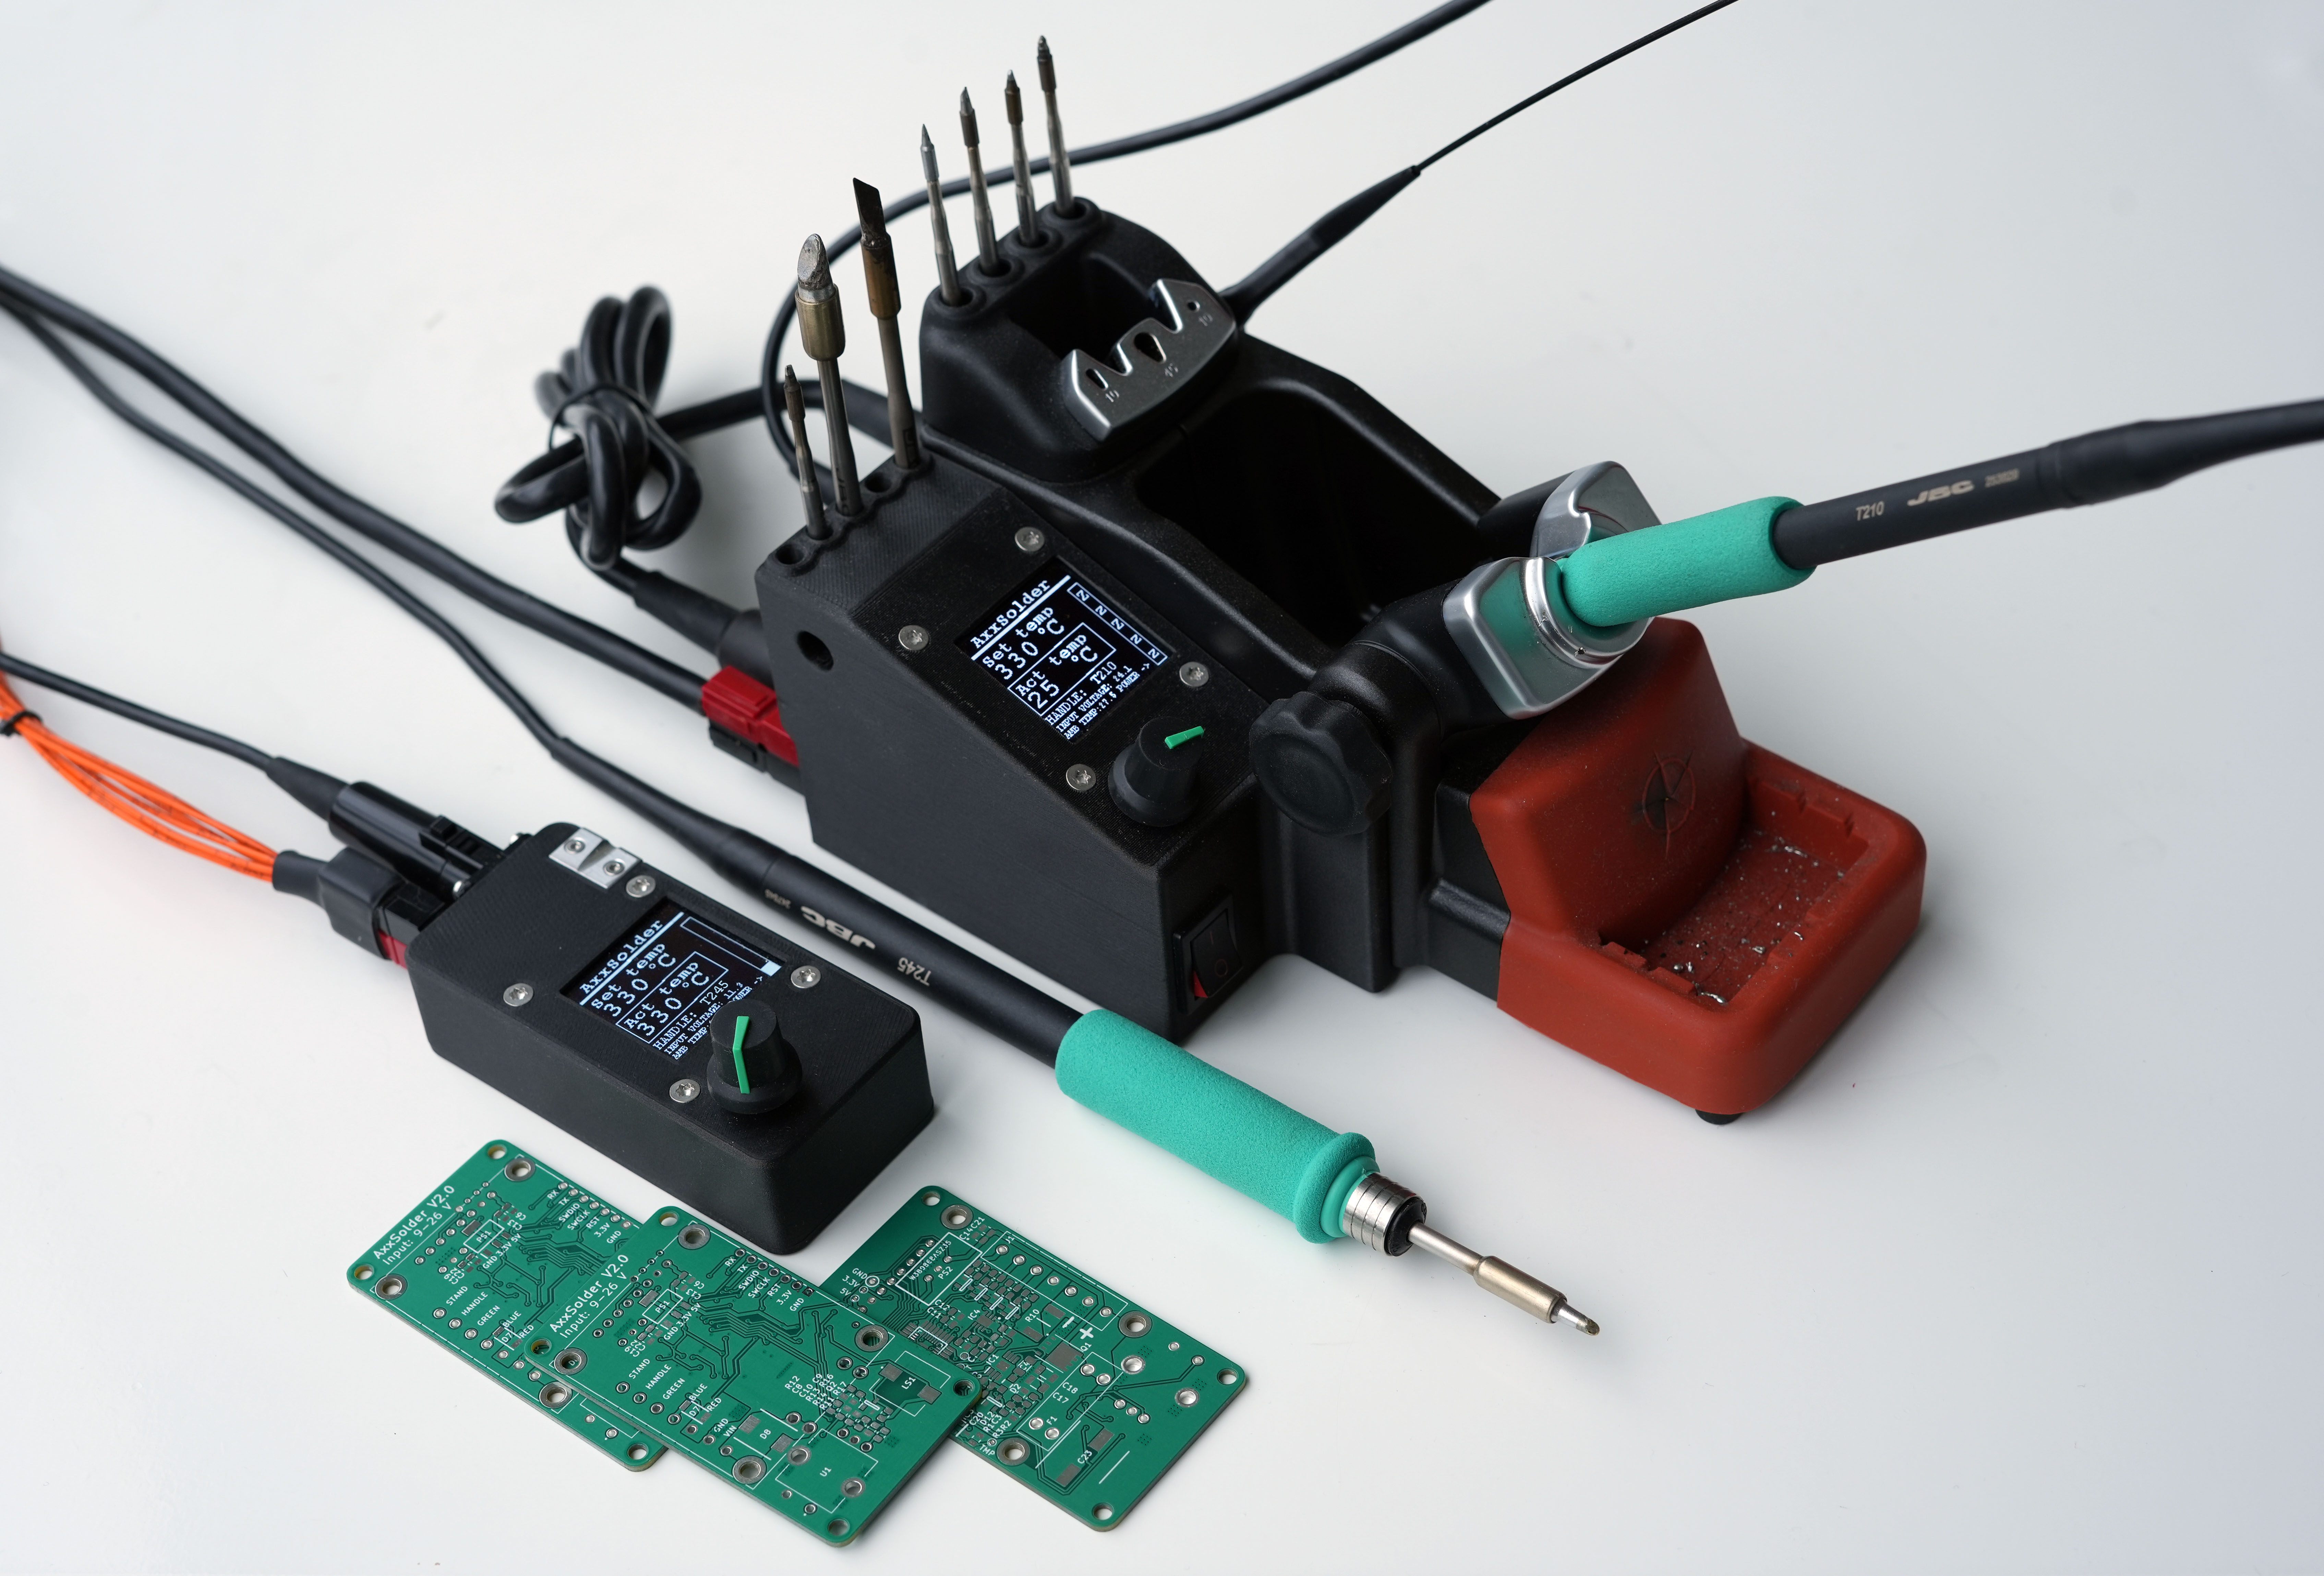 The soldering station's thoughtful design features workshop and portable versions